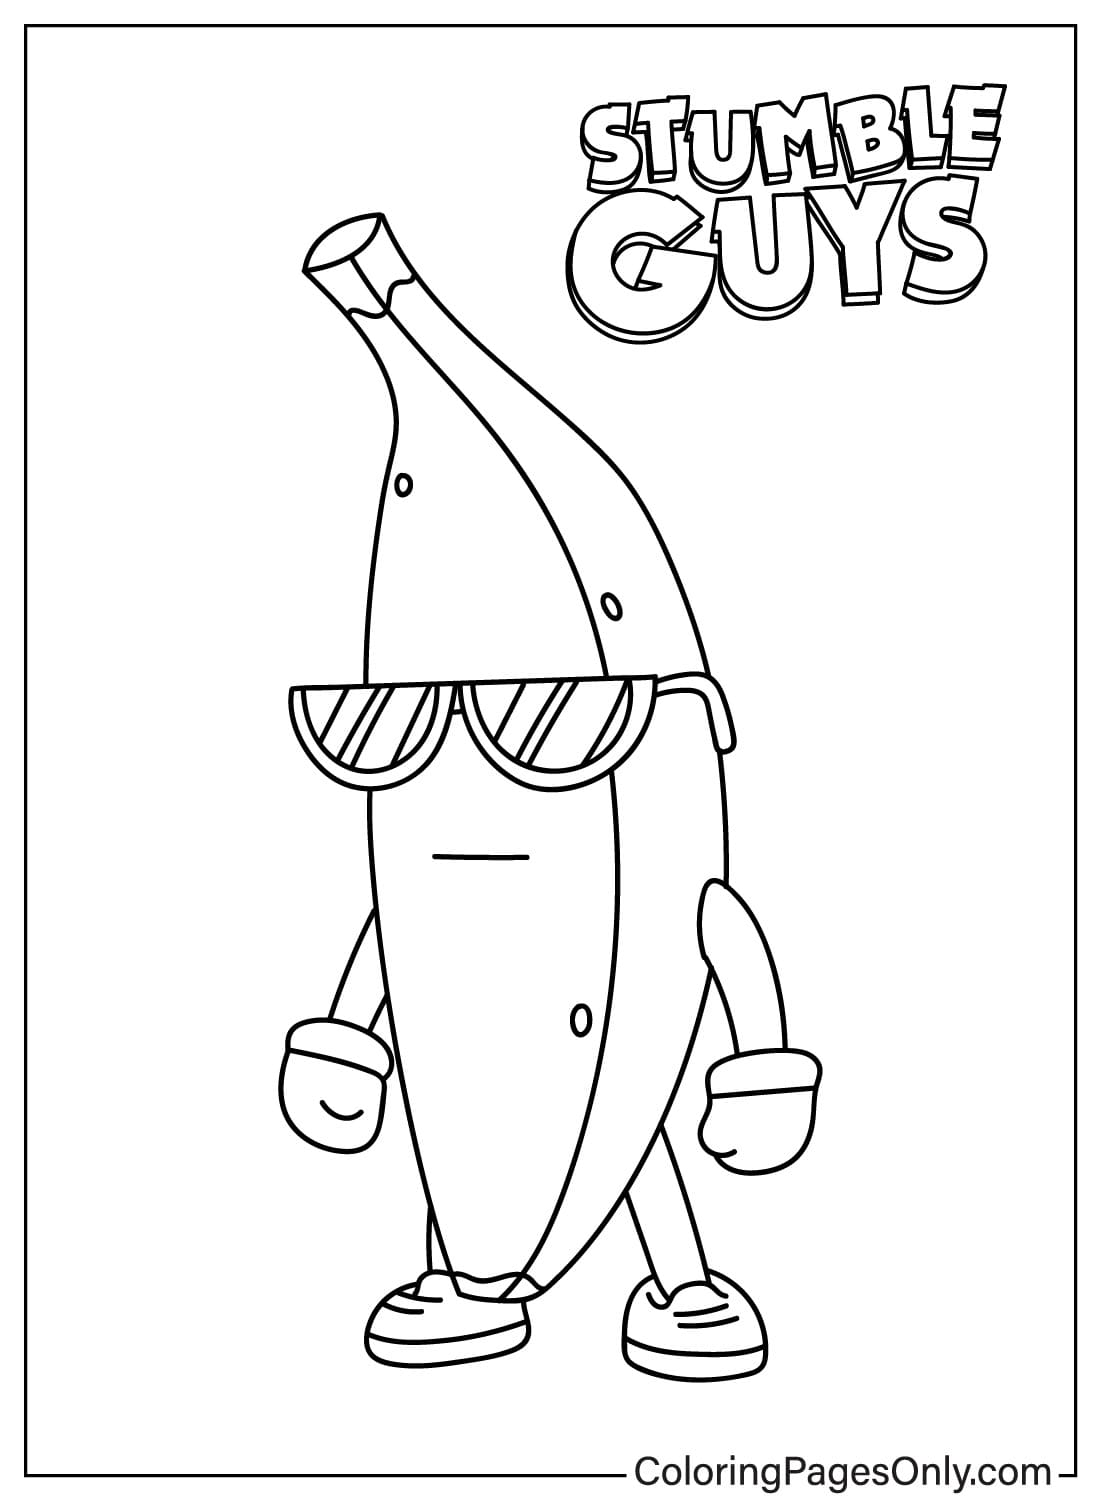 Stumble Guys Coloring Pages to Download from Stumble Guys